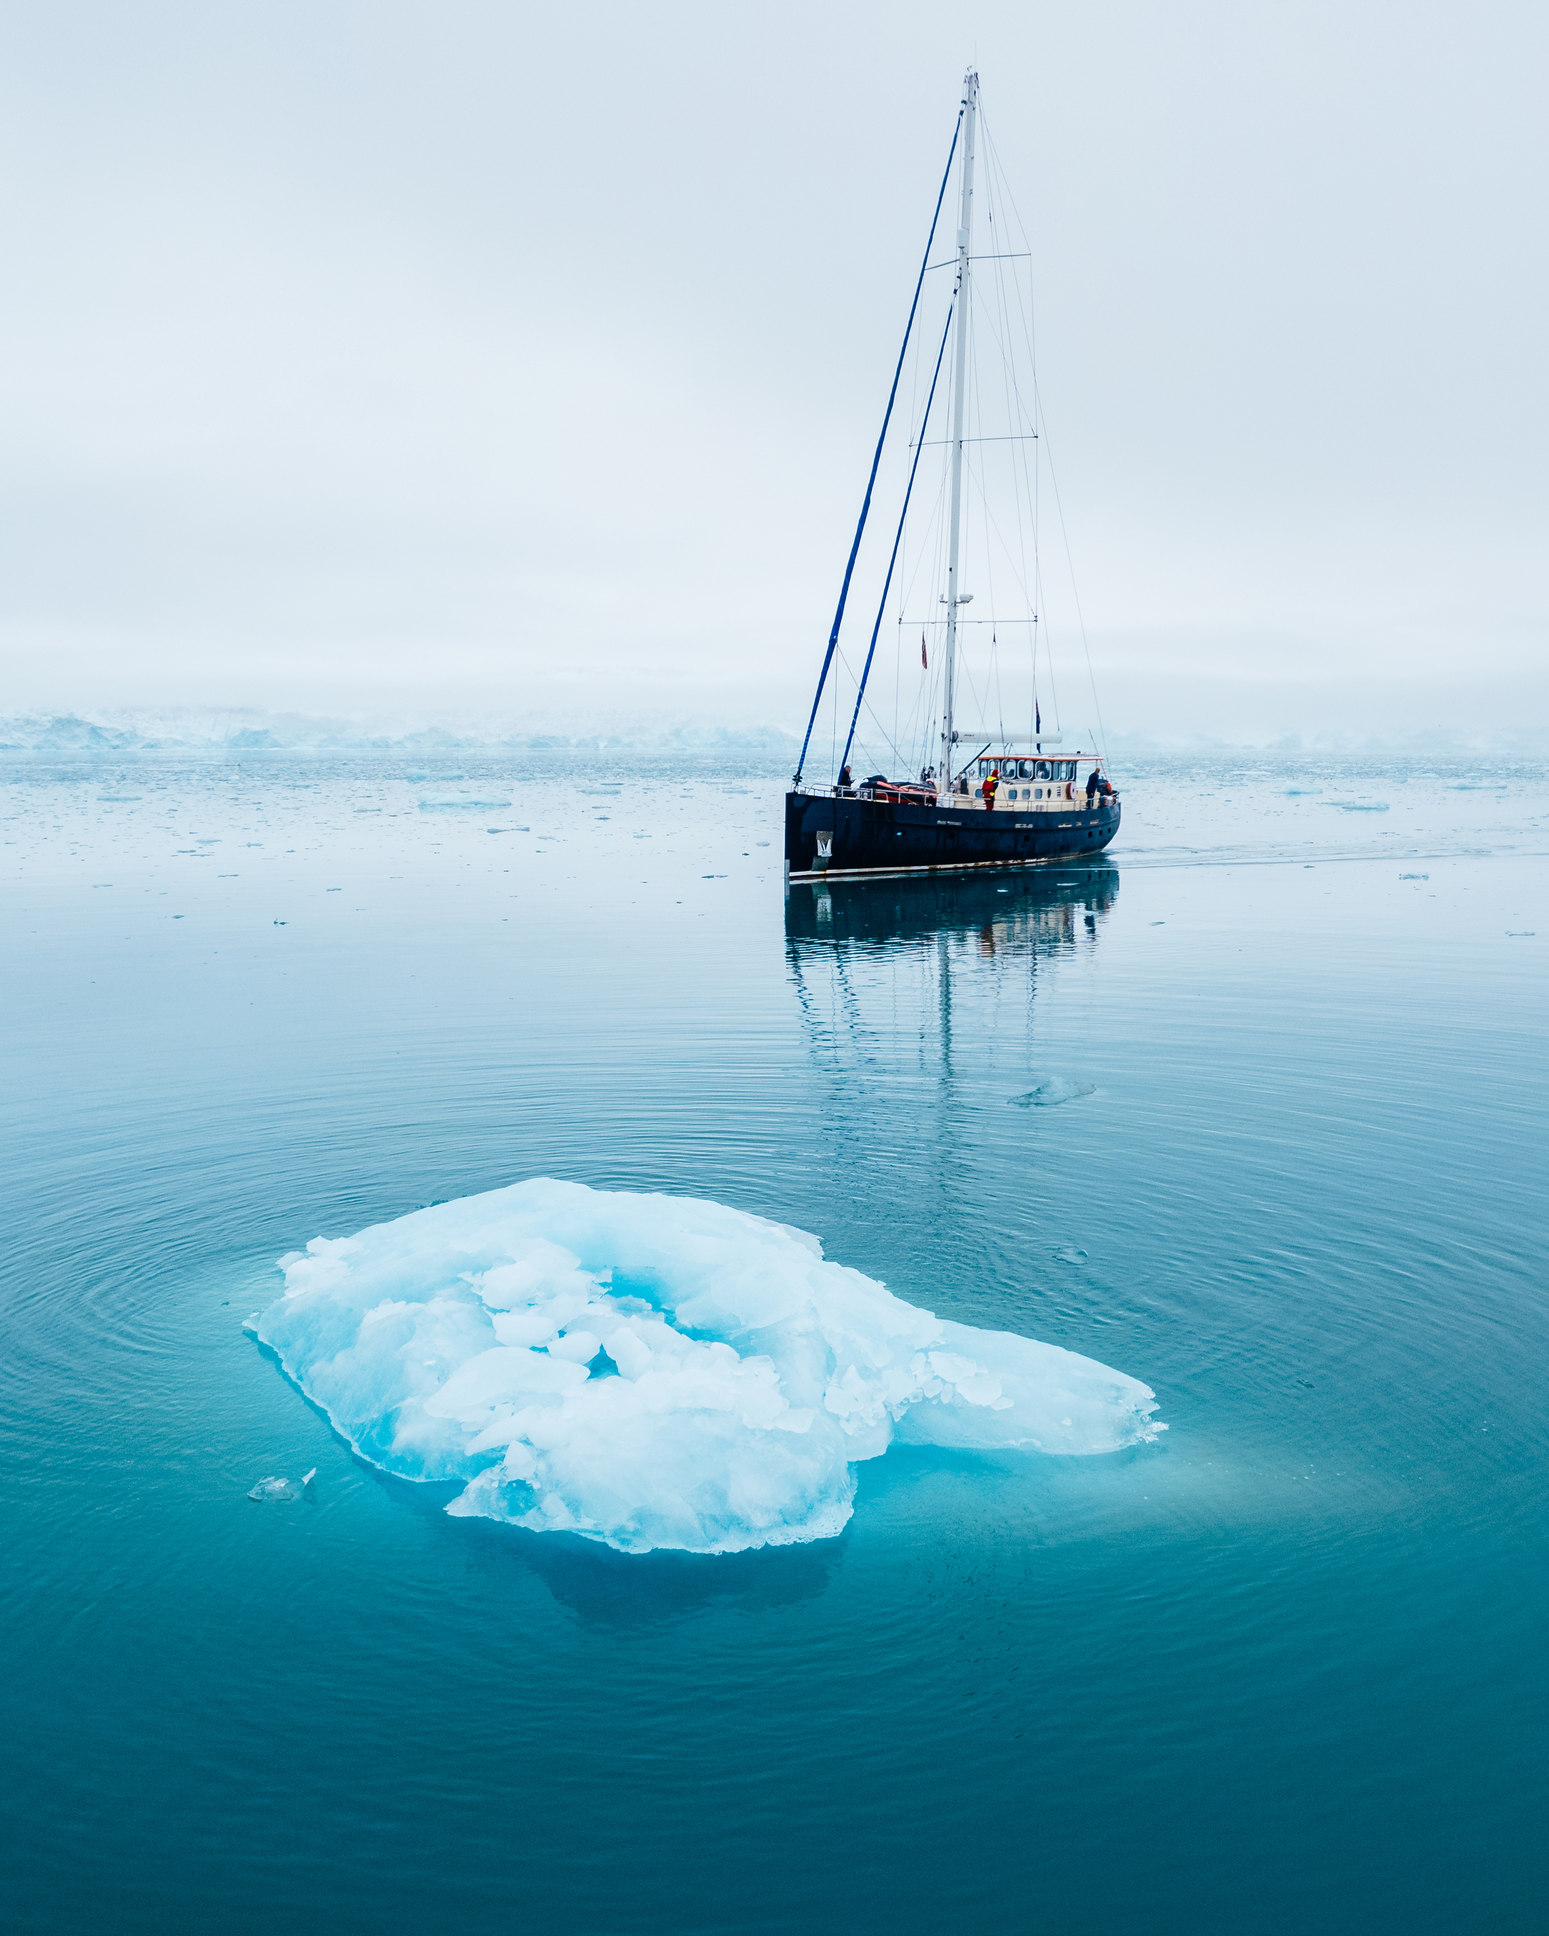 Sail boat in front of small ice berg